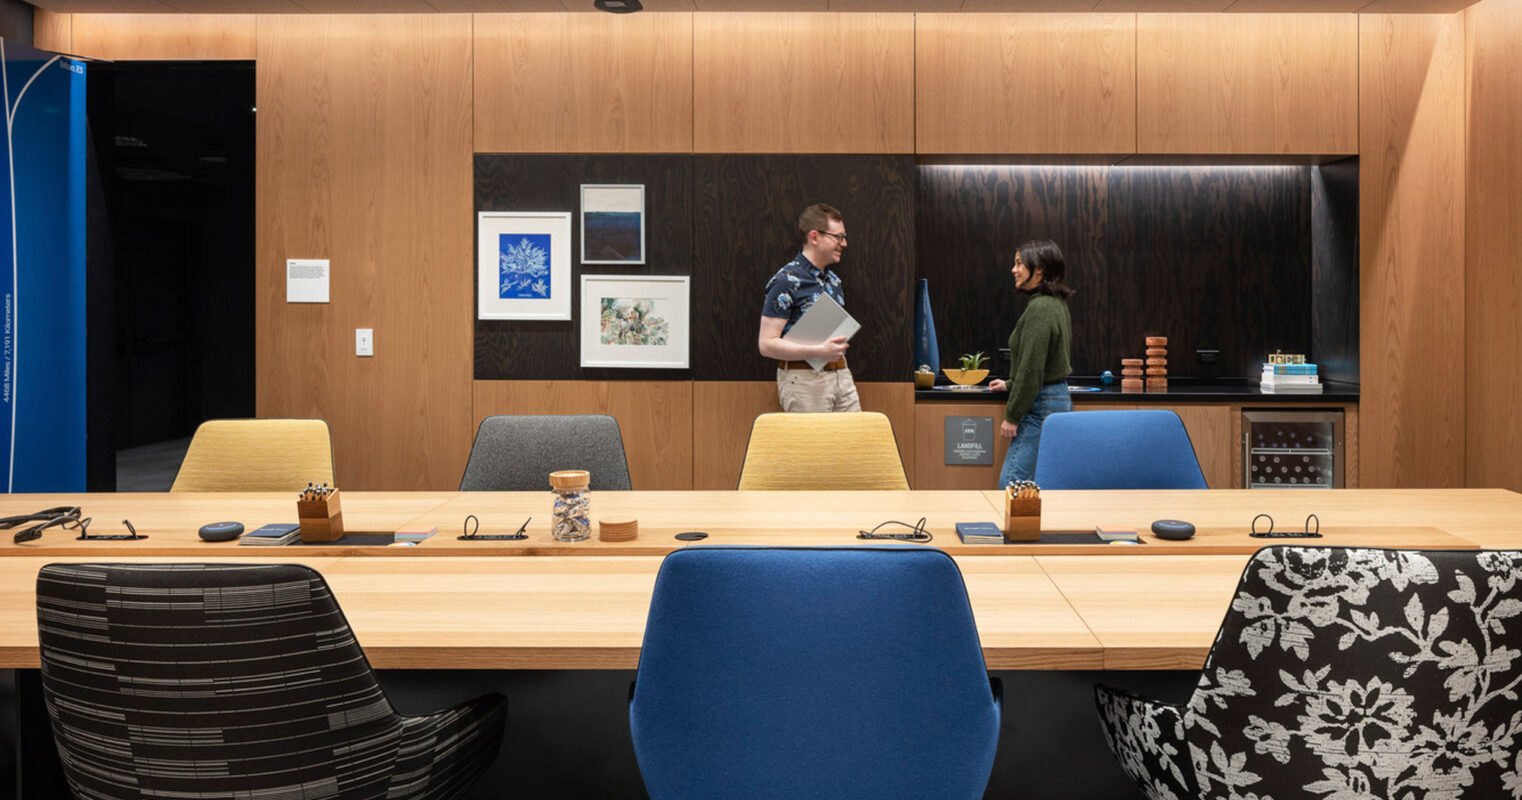 Contemporary office meeting space with warm wooden paneling and integrated shelving. Mustard yellow and royal blue office chairs punctuate the neutral palette. Overhead lighting casts an ambient glow, enhancing the room's inviting atmosphere.